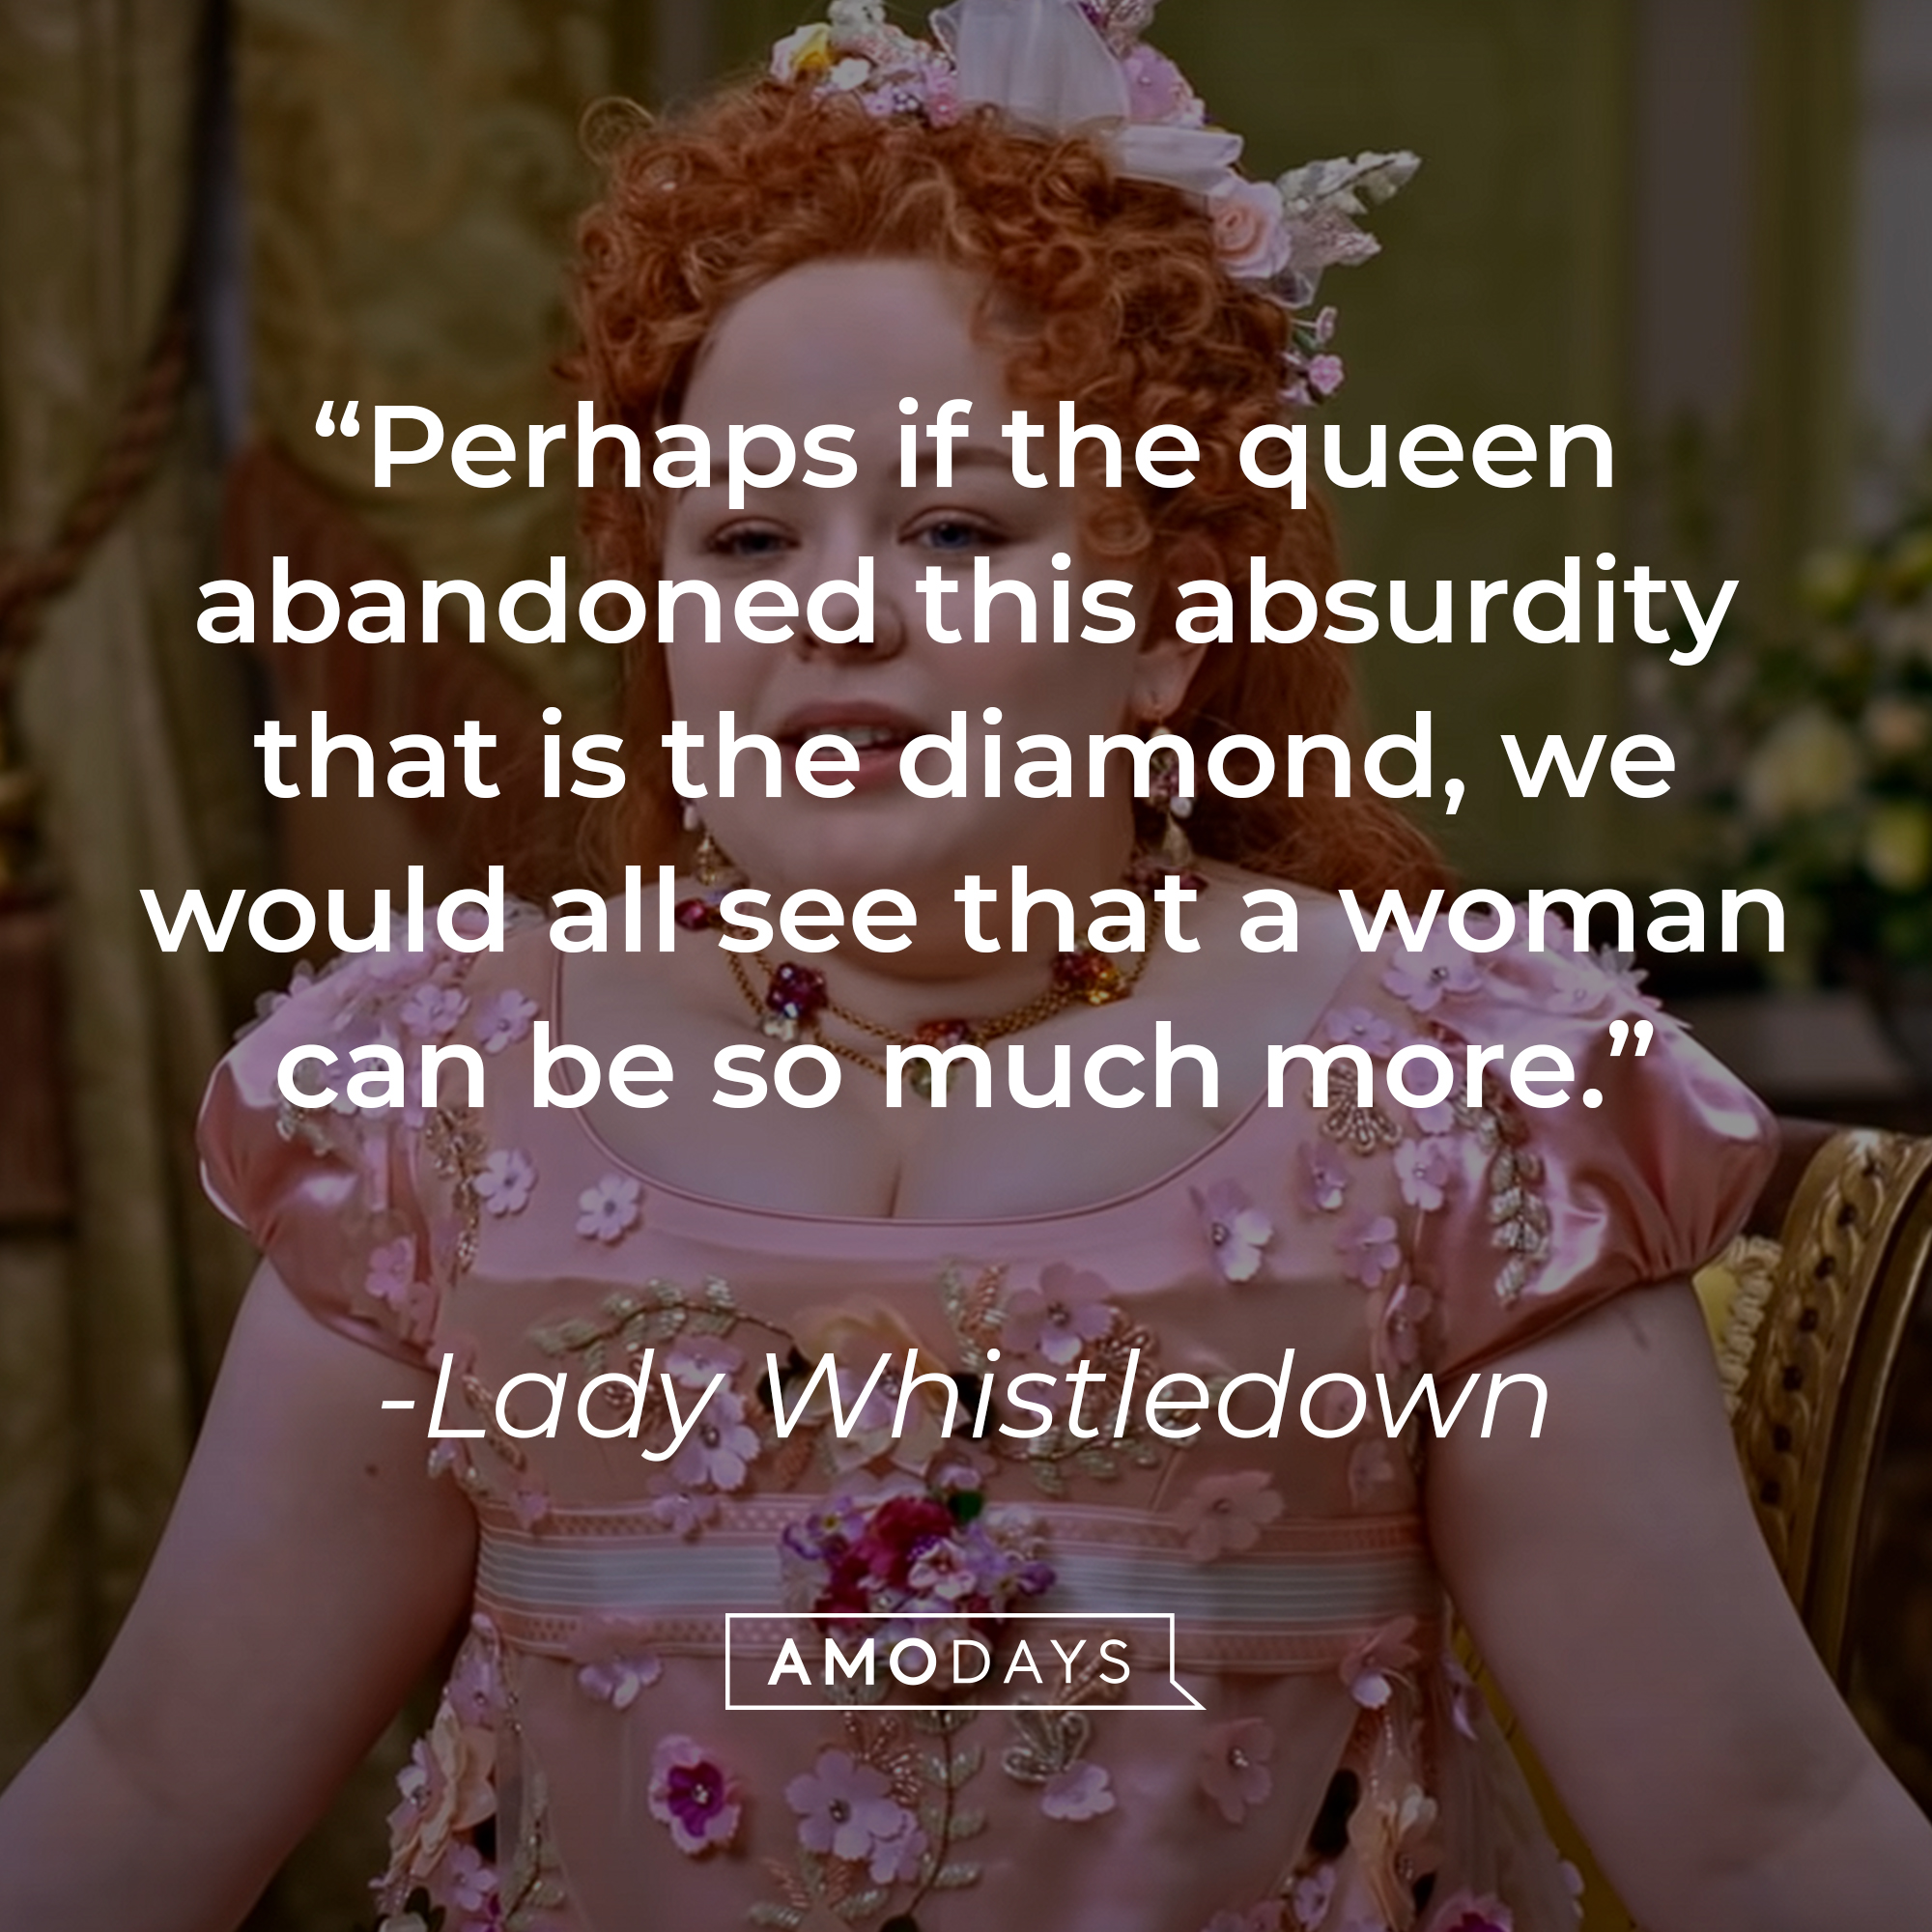 Lady Whistledown's quotes: "Perhaps if the queen abandoned this absurdity that is the diamond, we would all see that a woman can be so much more." | Source: Youtube.com/Netflix